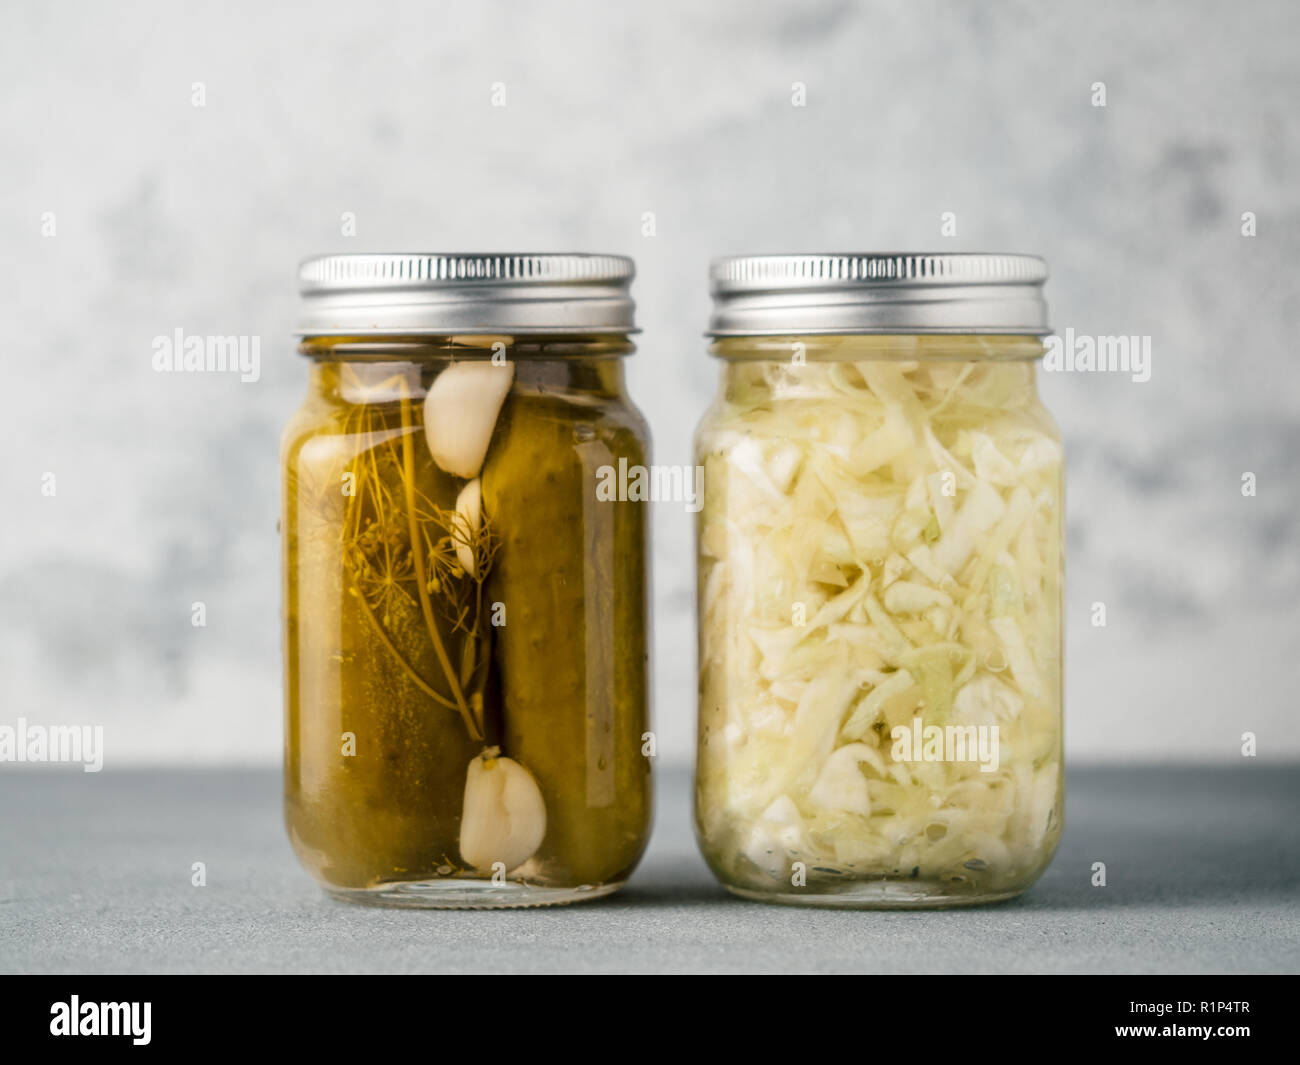 Pickled cucumbers and Sauerkraut on gray background. Perfect homemade marinated cucumbers and pickling cabbage in mason jar at home on table. Stock Photo